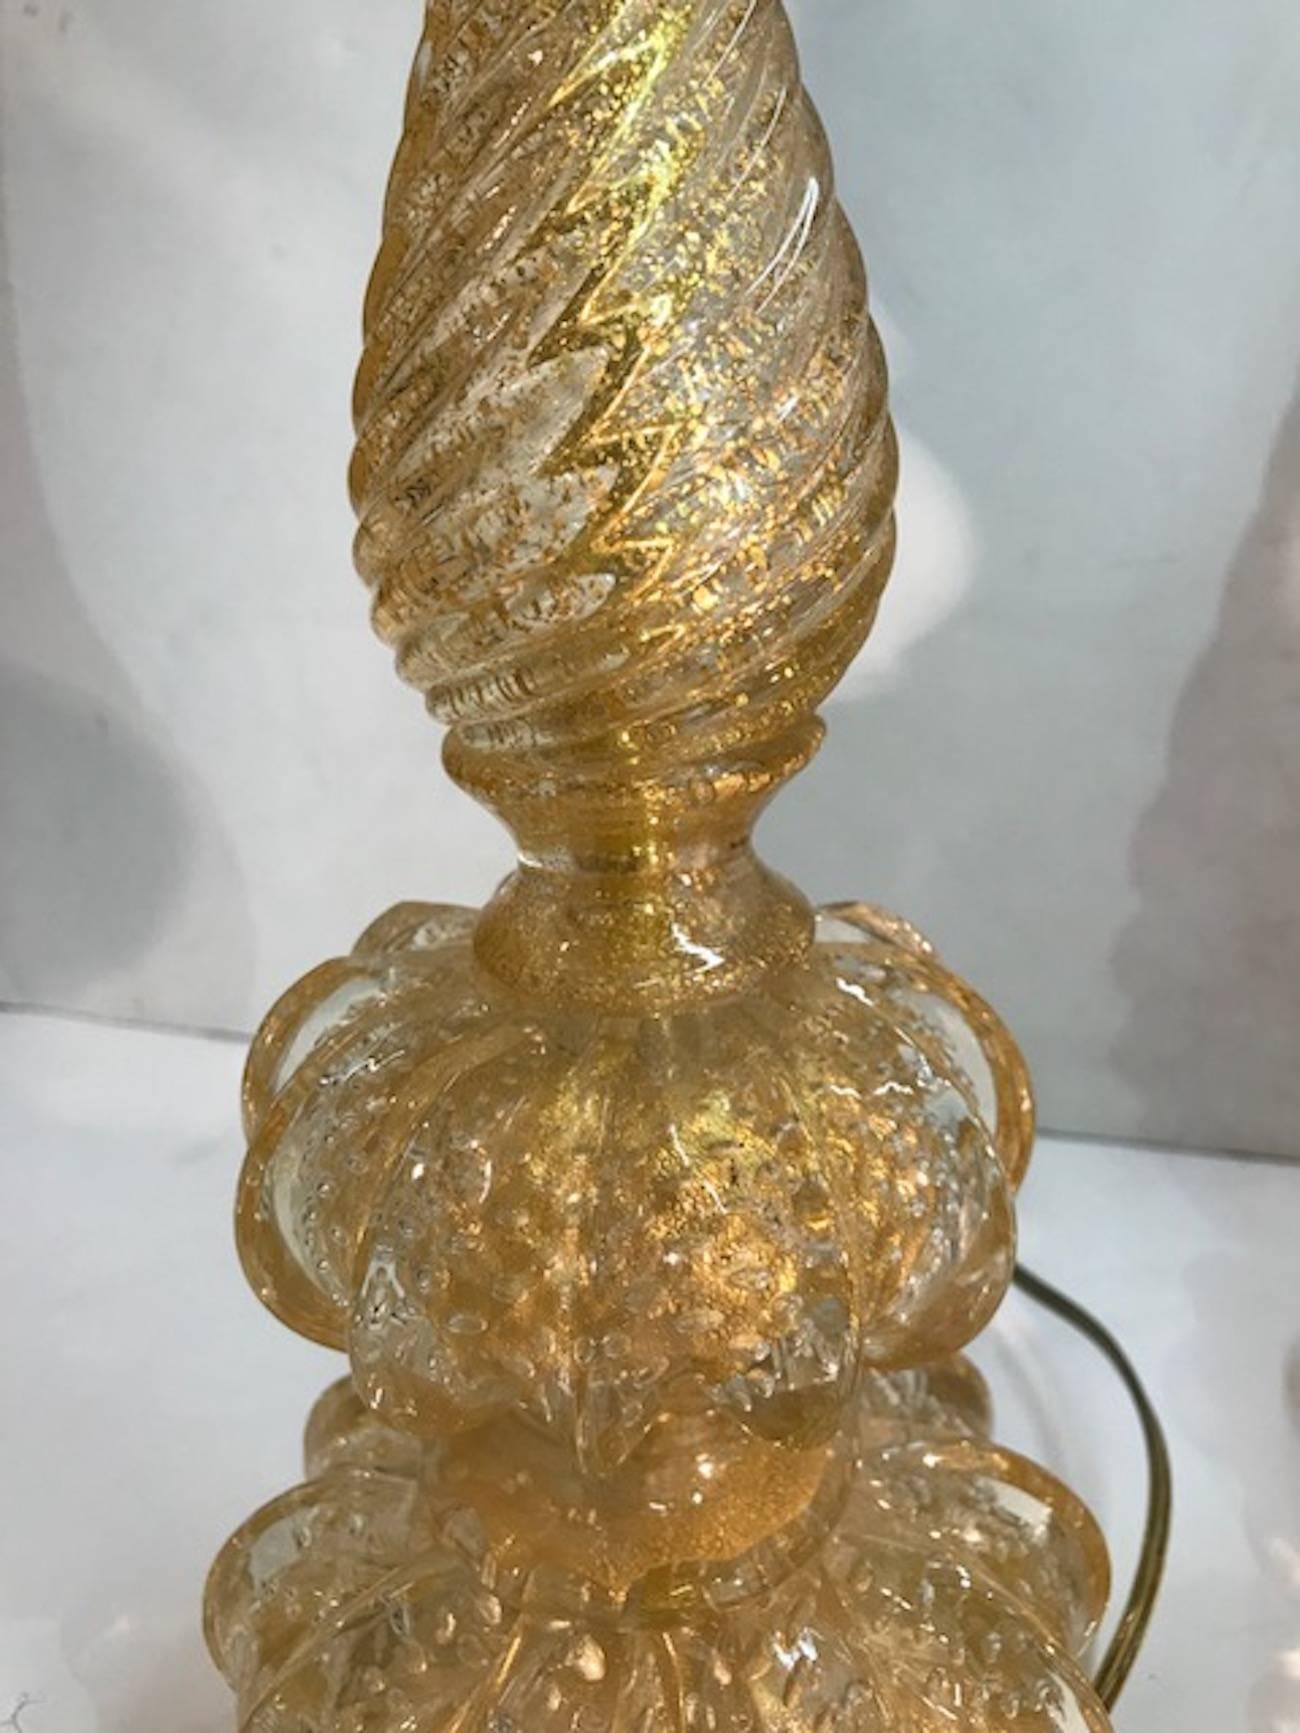 A lovely pair of 1950s Venetian table lamps produced on the island of Murano and attributed to the Seguso glass house. Hand blow in clear with gold flecks known at aventurine glass. Bases of lamps have engineered pattern of internal bubbles. The